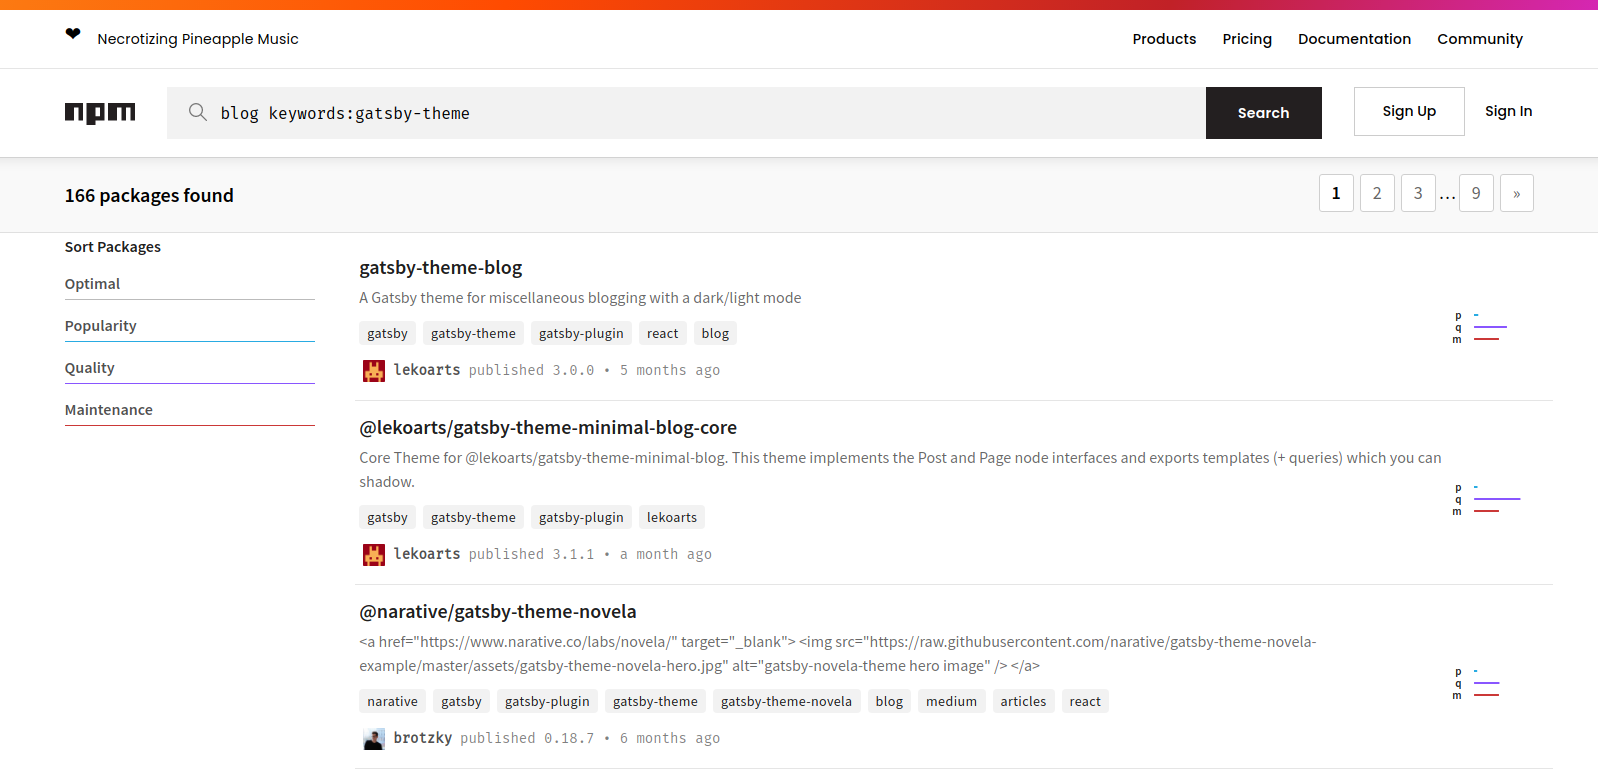 npm results page for the "blog keywords:gatsby-theme" search. "gatsby-theme-blog" is the first package.